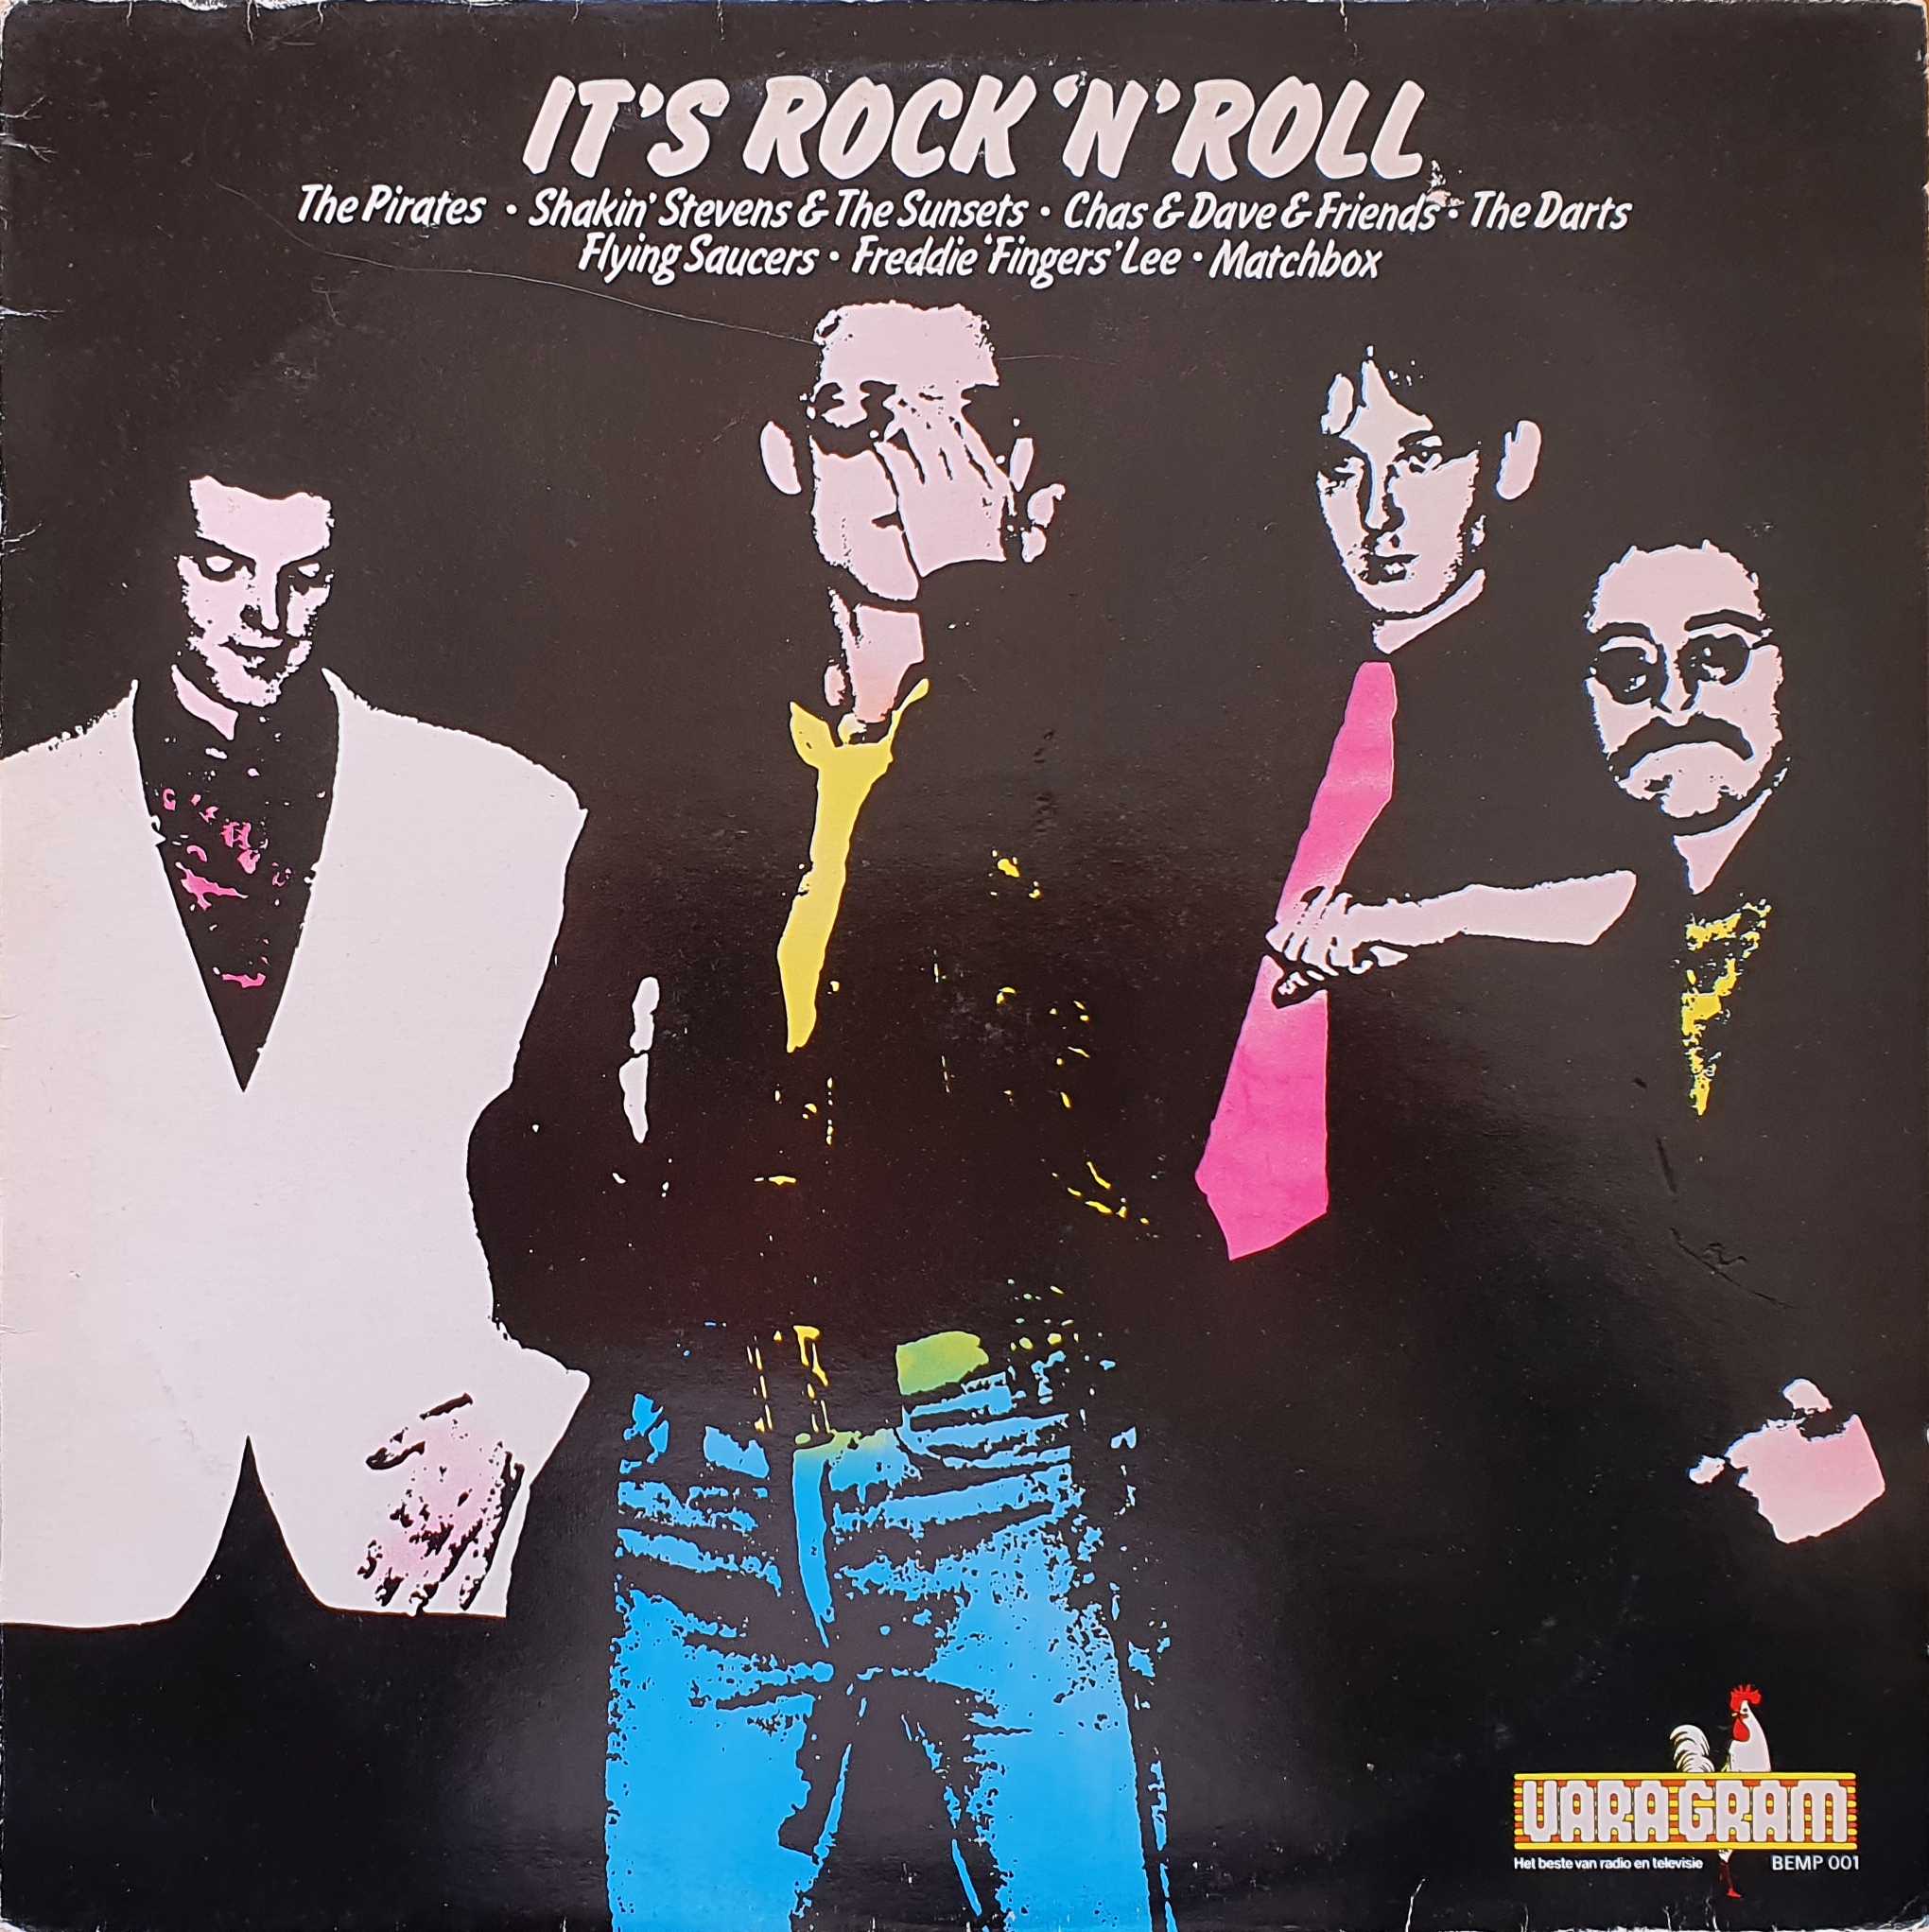 Picture of BEMP 001-iD It's rock 'n' roll by artist Various from the BBC albums - Records and Tapes library